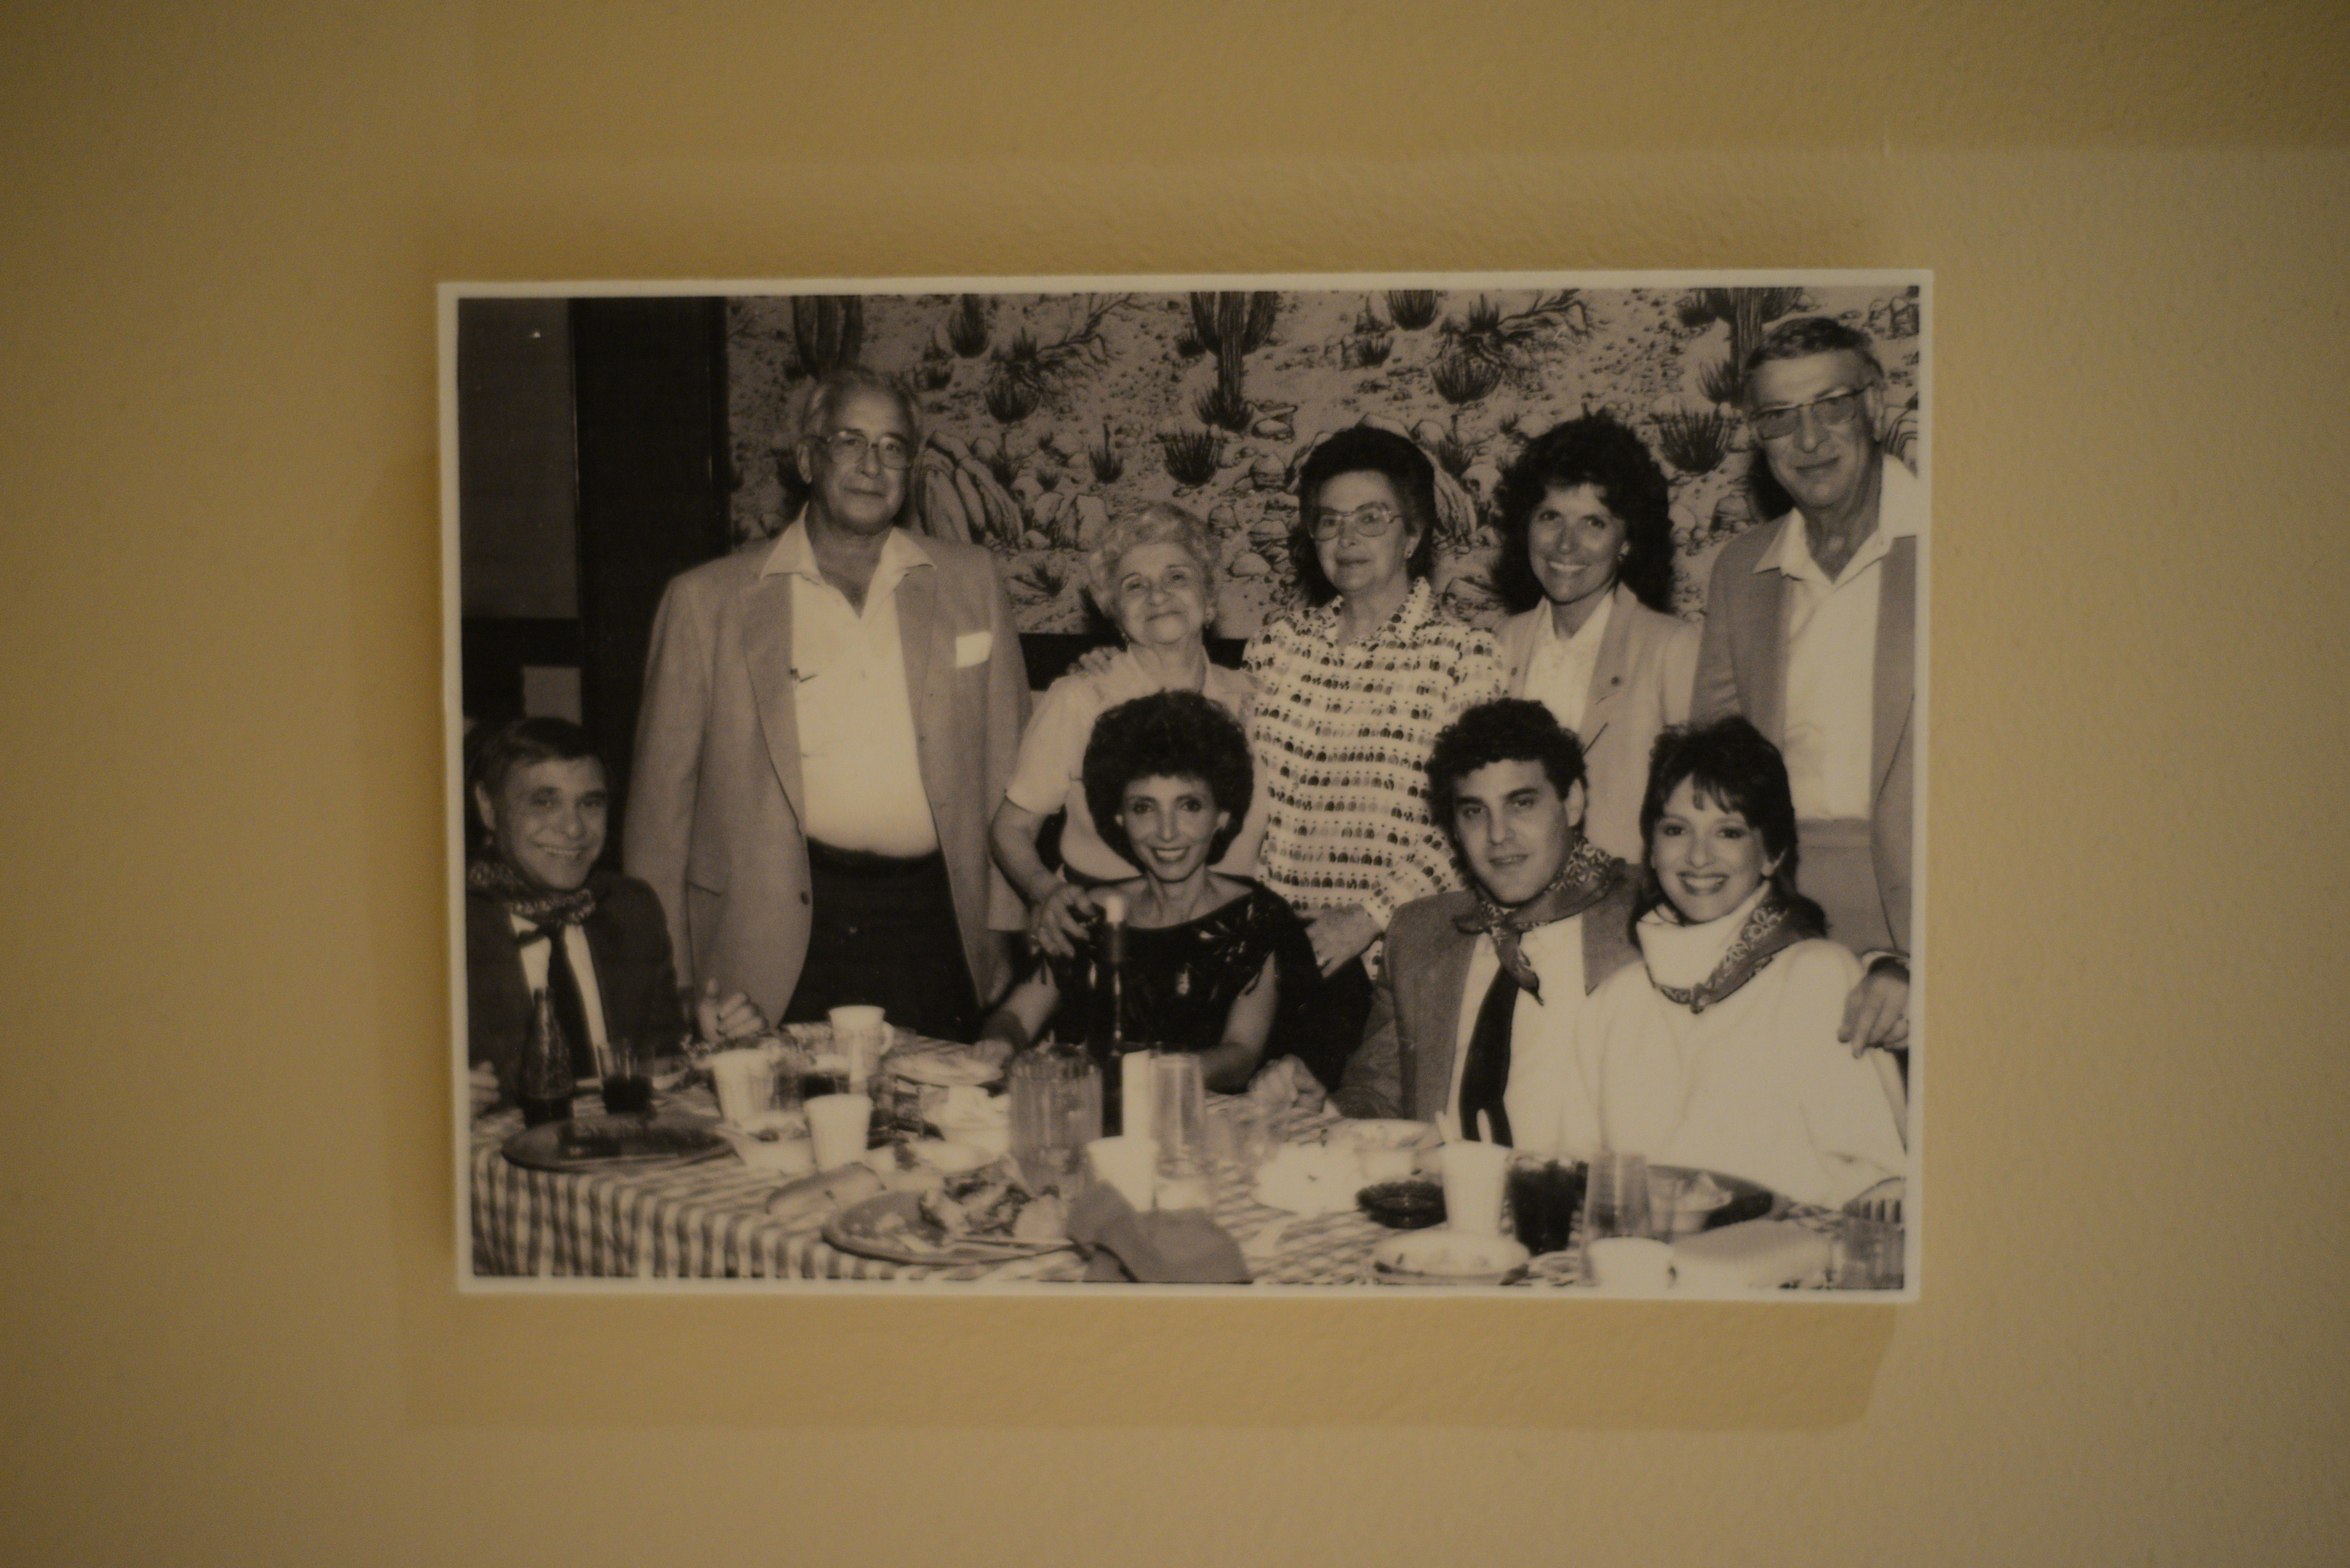 Photograph of people at a luncheon, date unknown